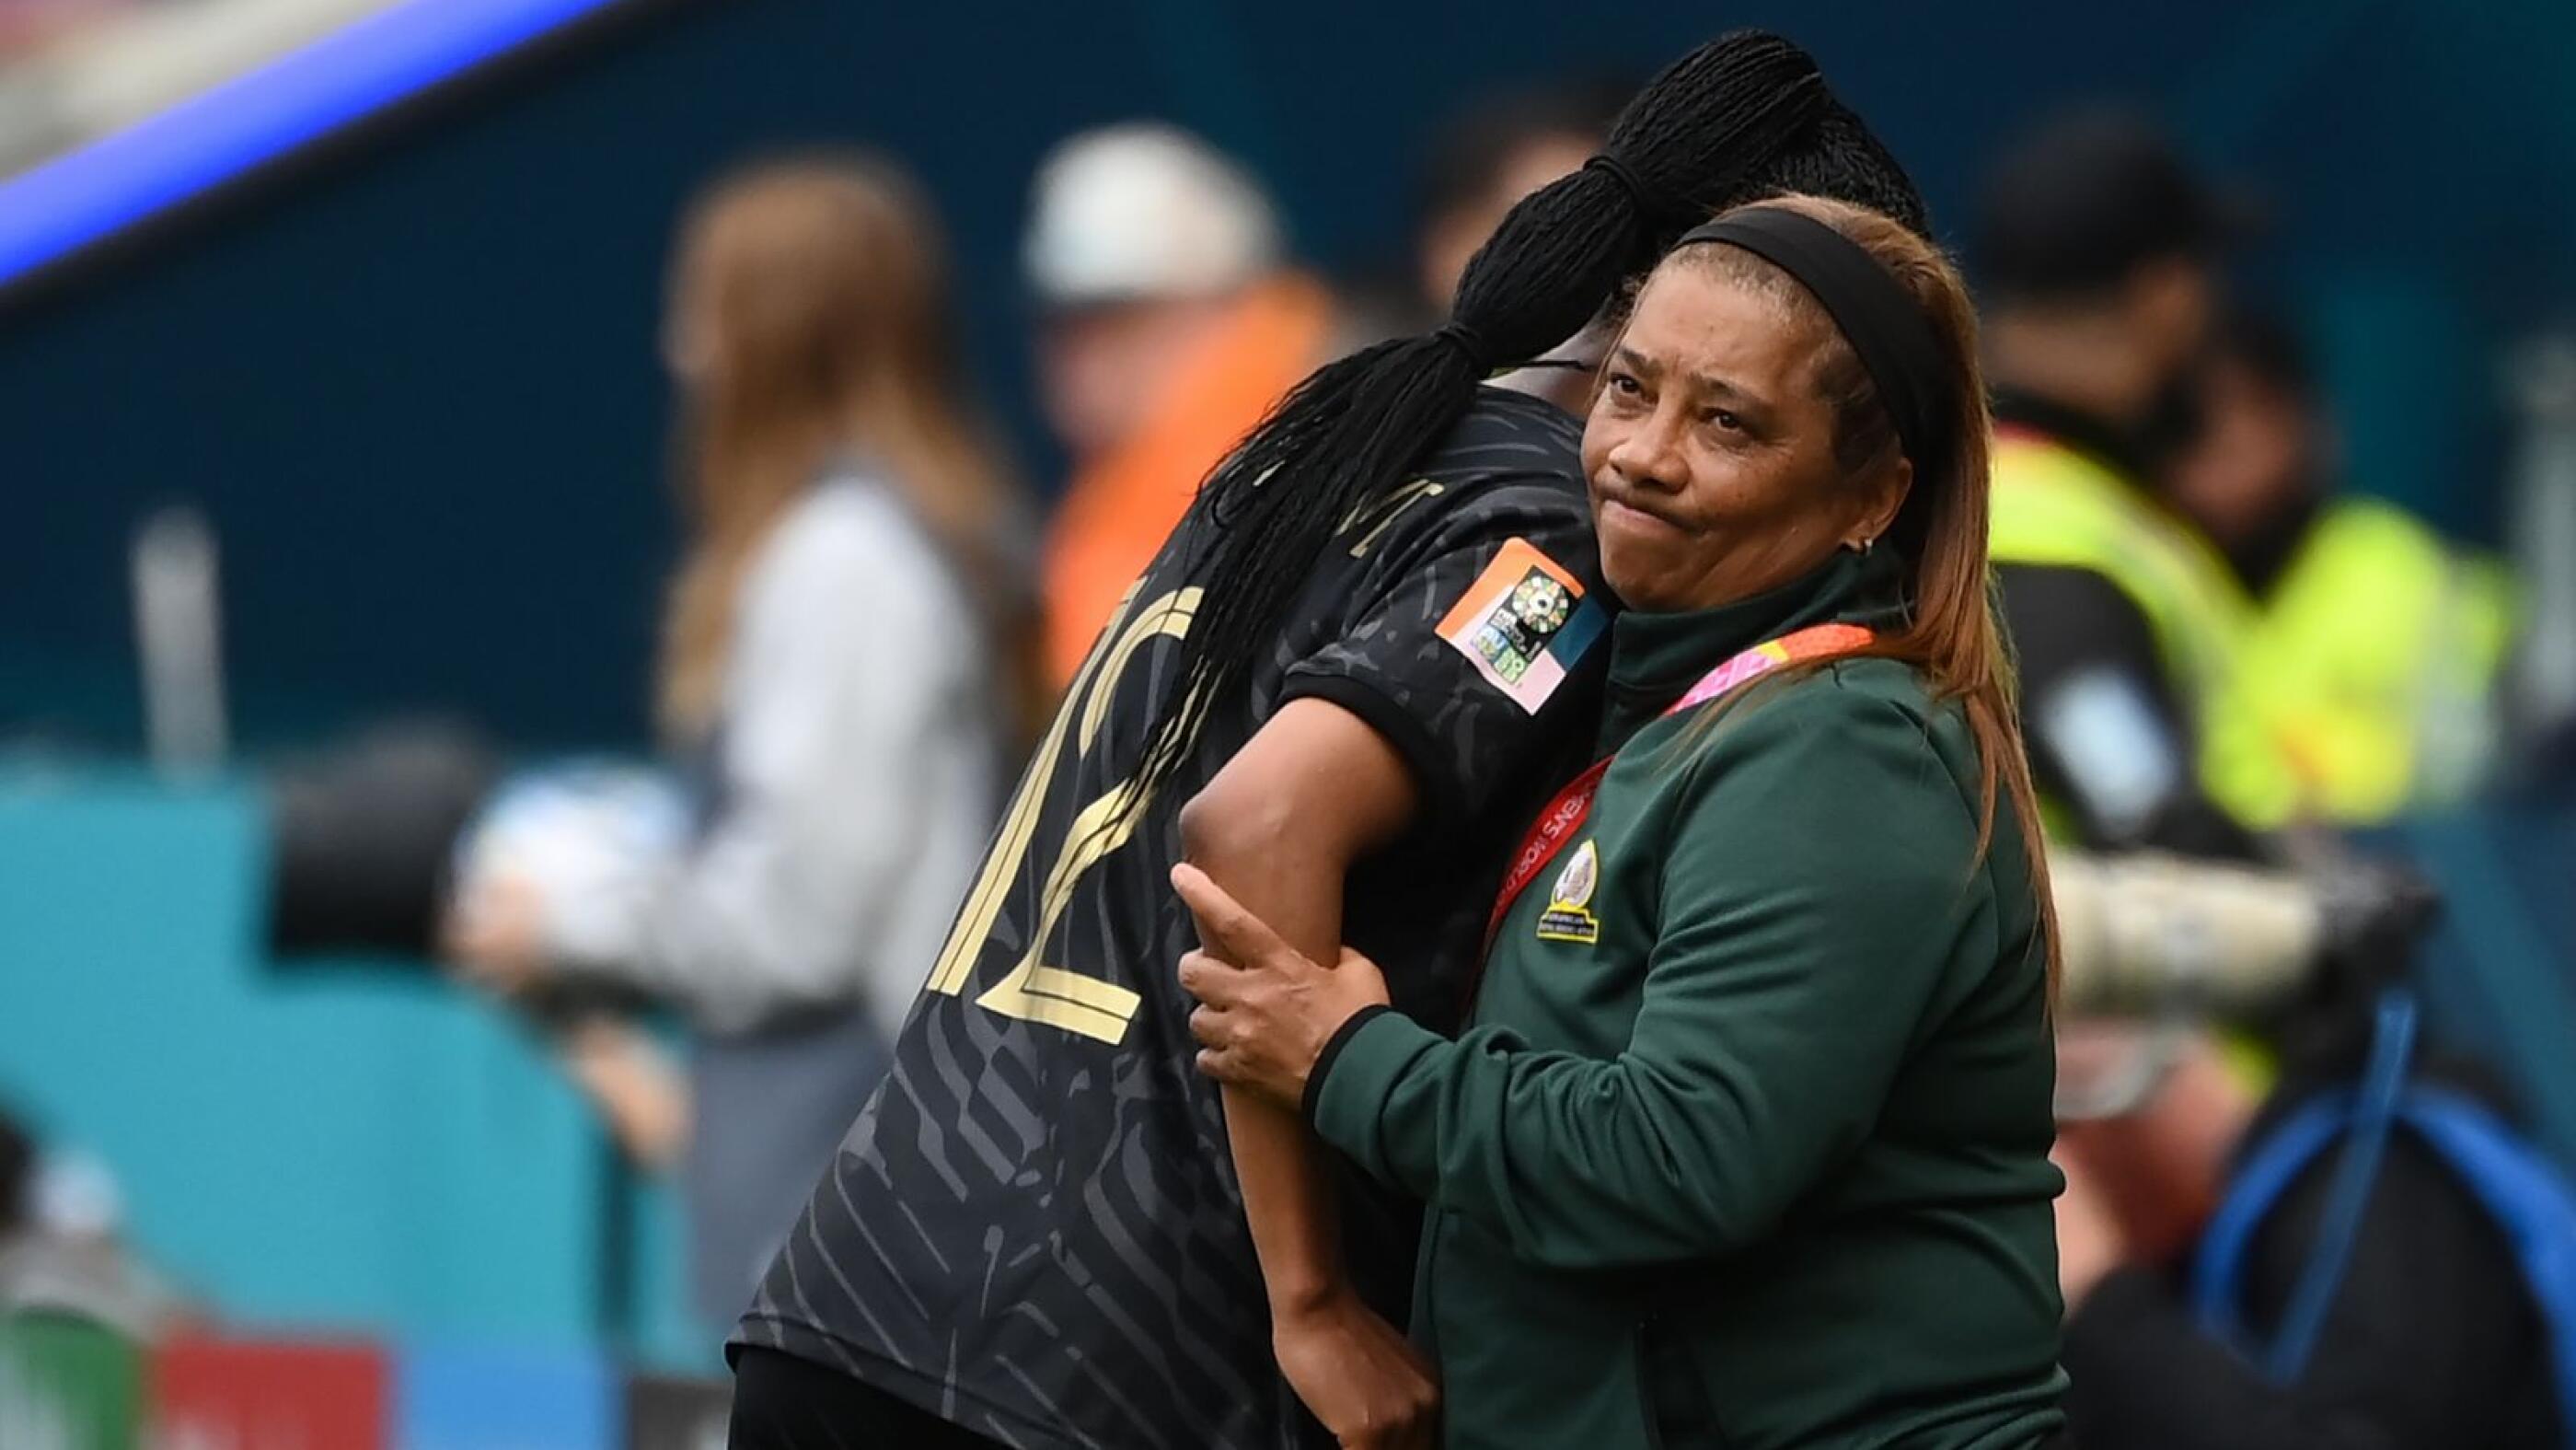 South Africa's coach Desiree Ellis (right) embraces South Africa's Jermaine Seoposenwe as she leaves the pitch for a substitution during the Women's World Cup round of 16 match against Netherlands